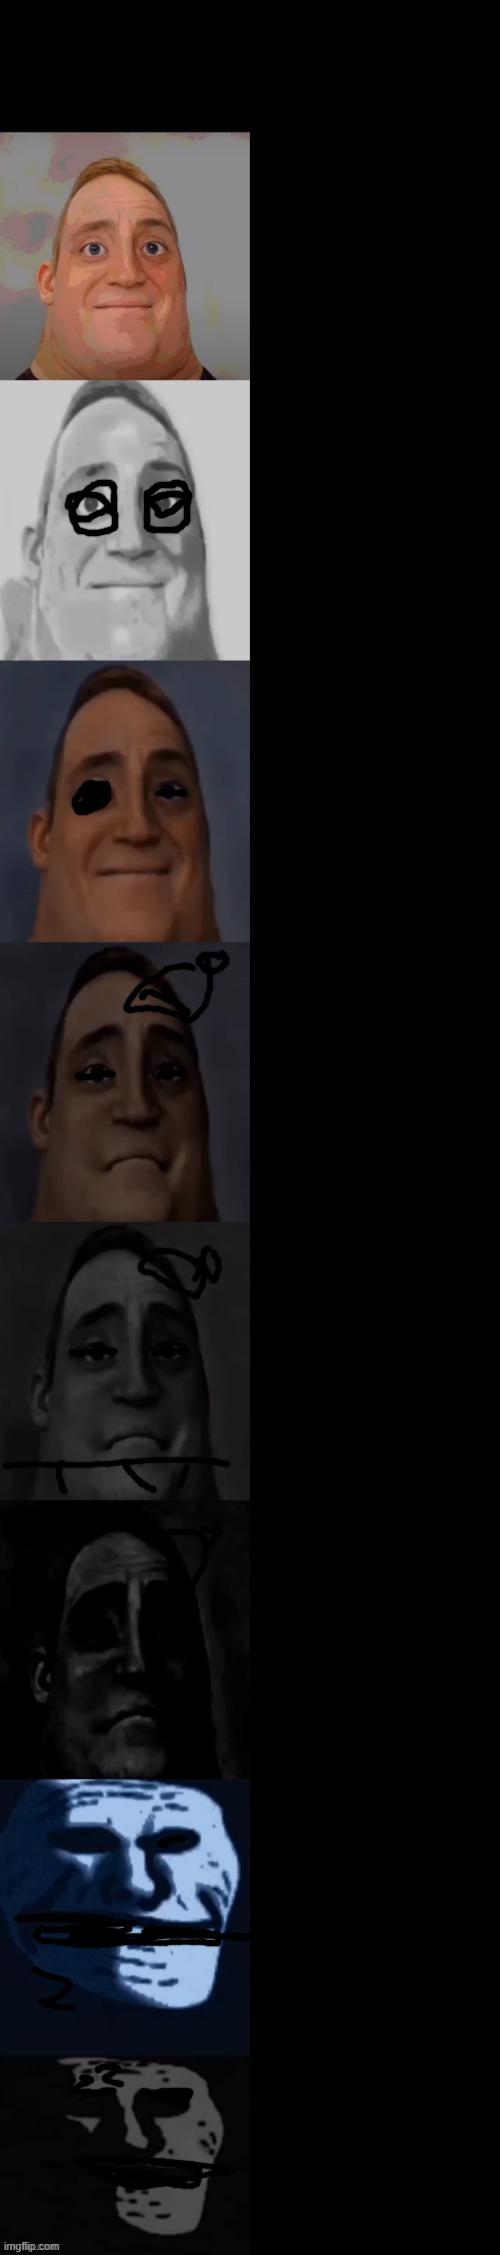 sleepy and sad | image tagged in mr incredible becoming sad | made w/ Imgflip meme maker